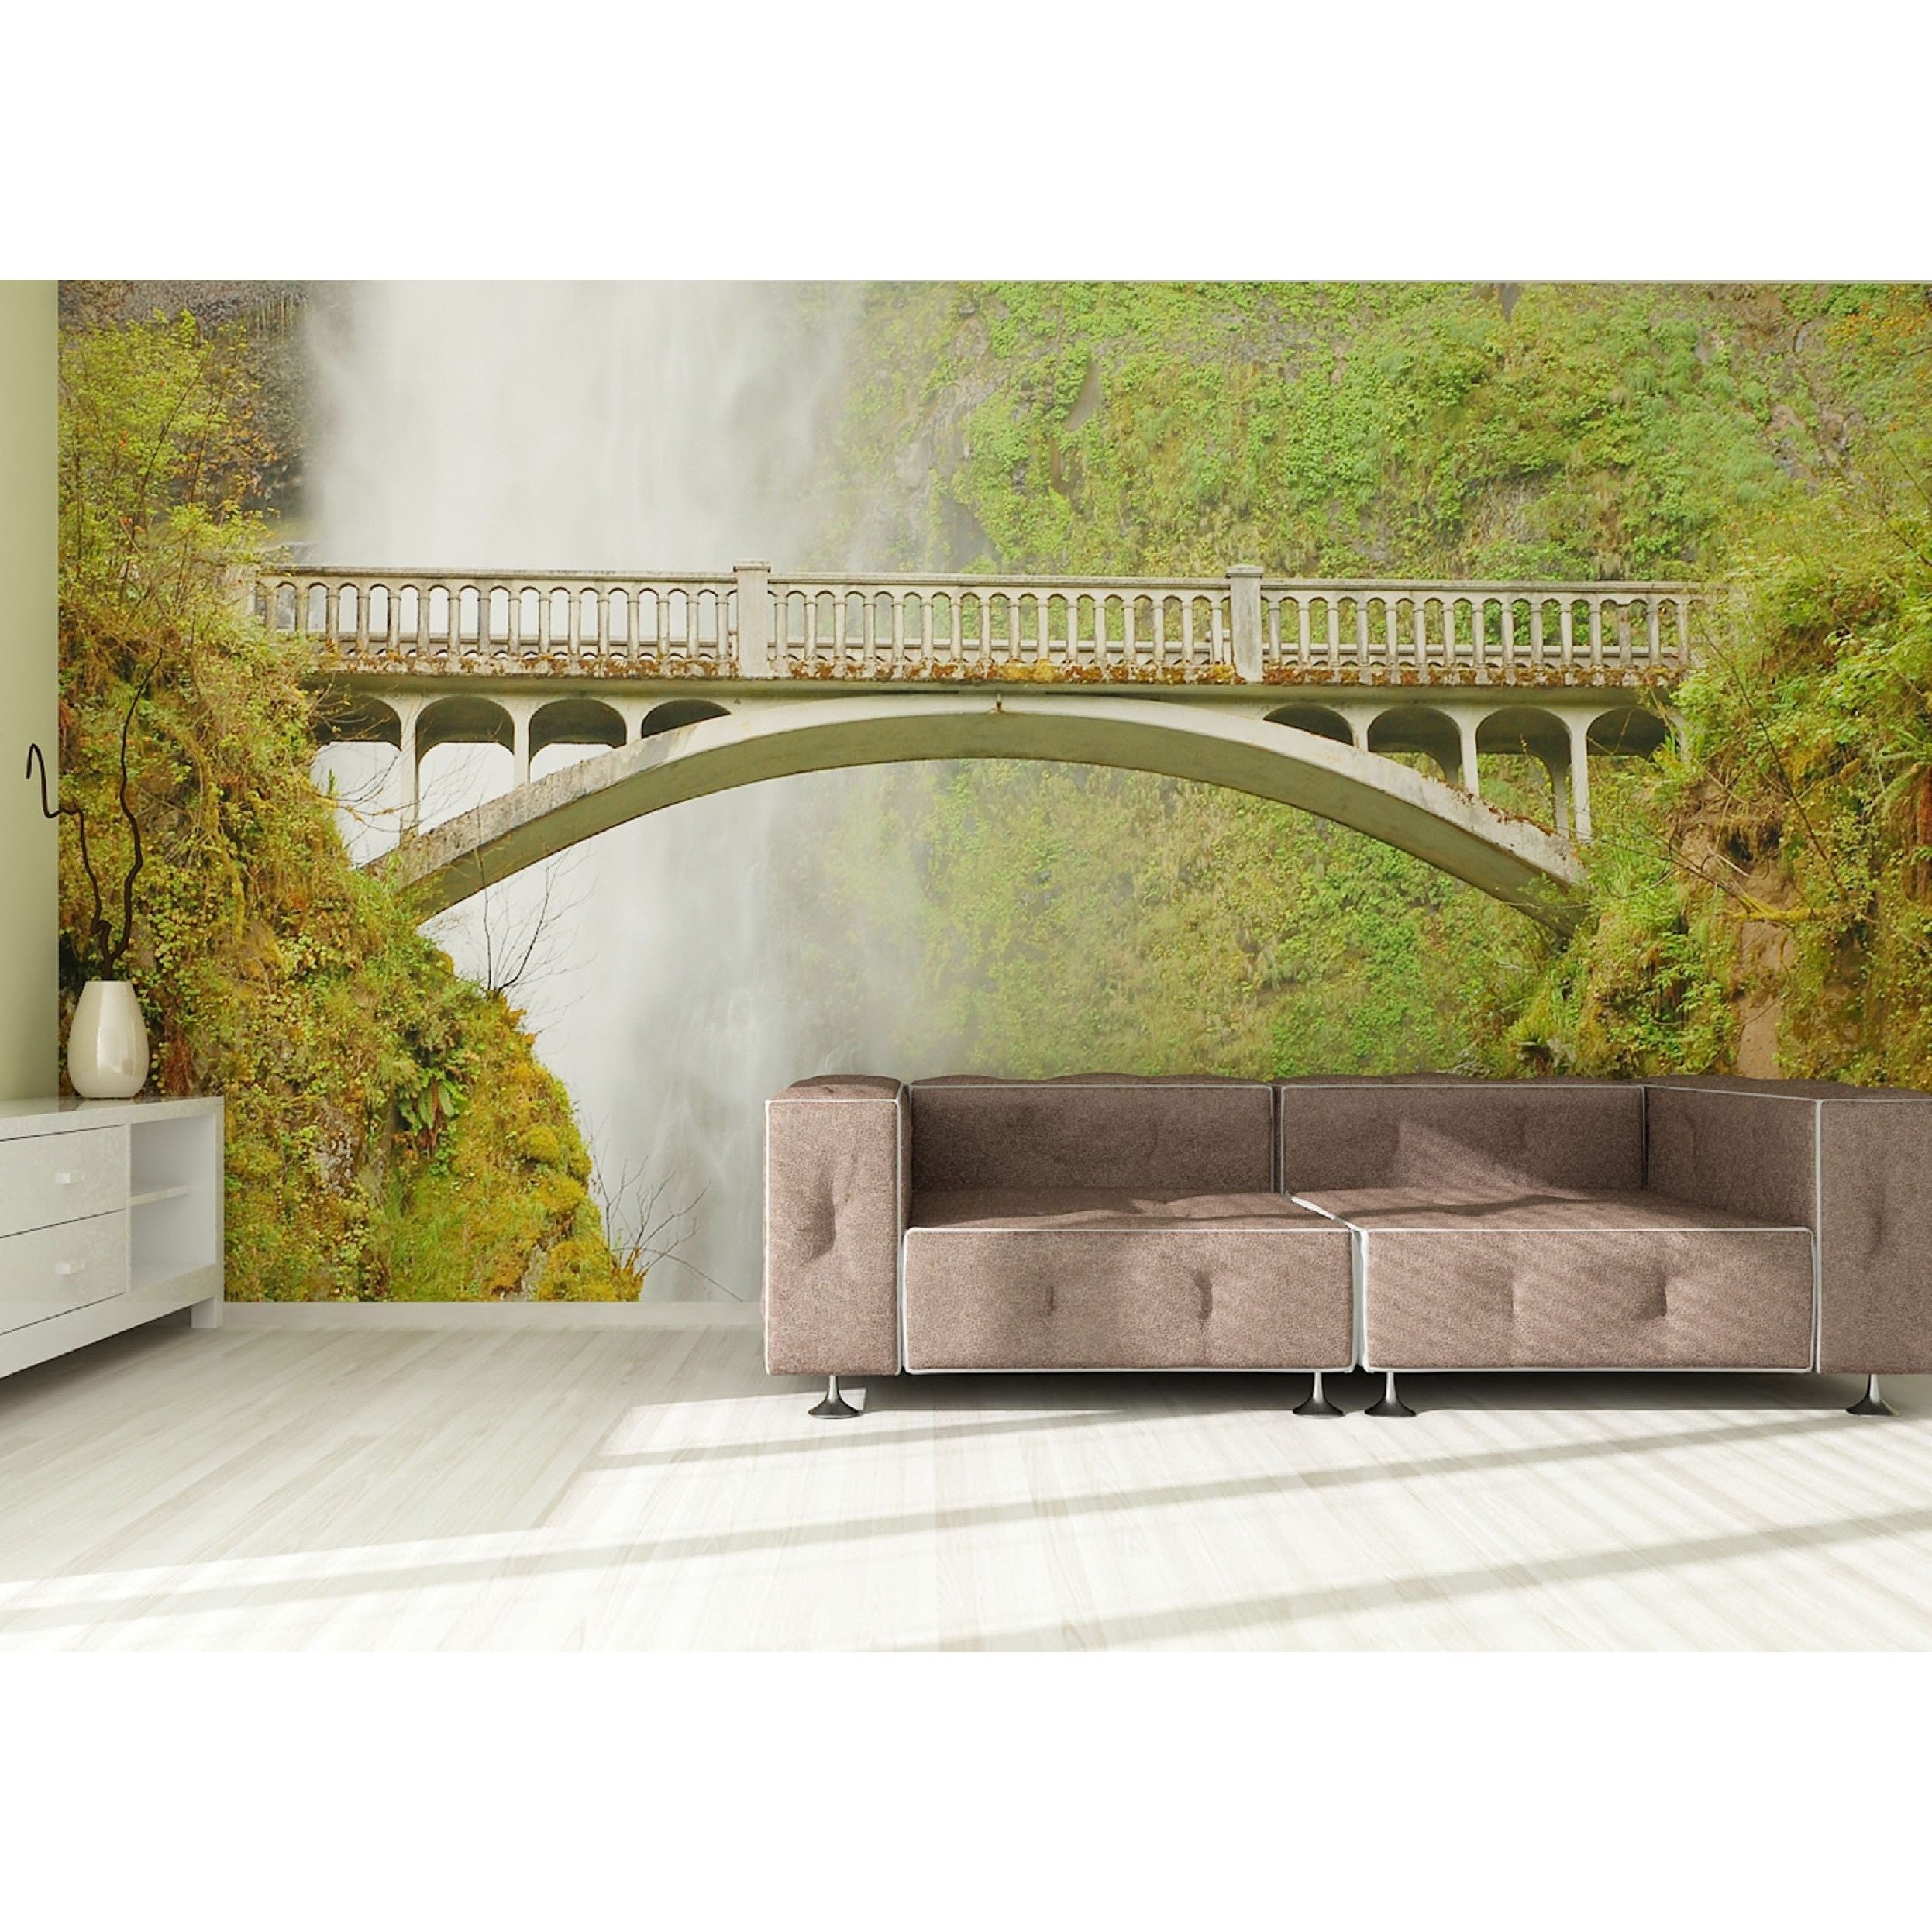 Tranquil Forest Bridge Wall Mural: Embrace Nature's Beauty